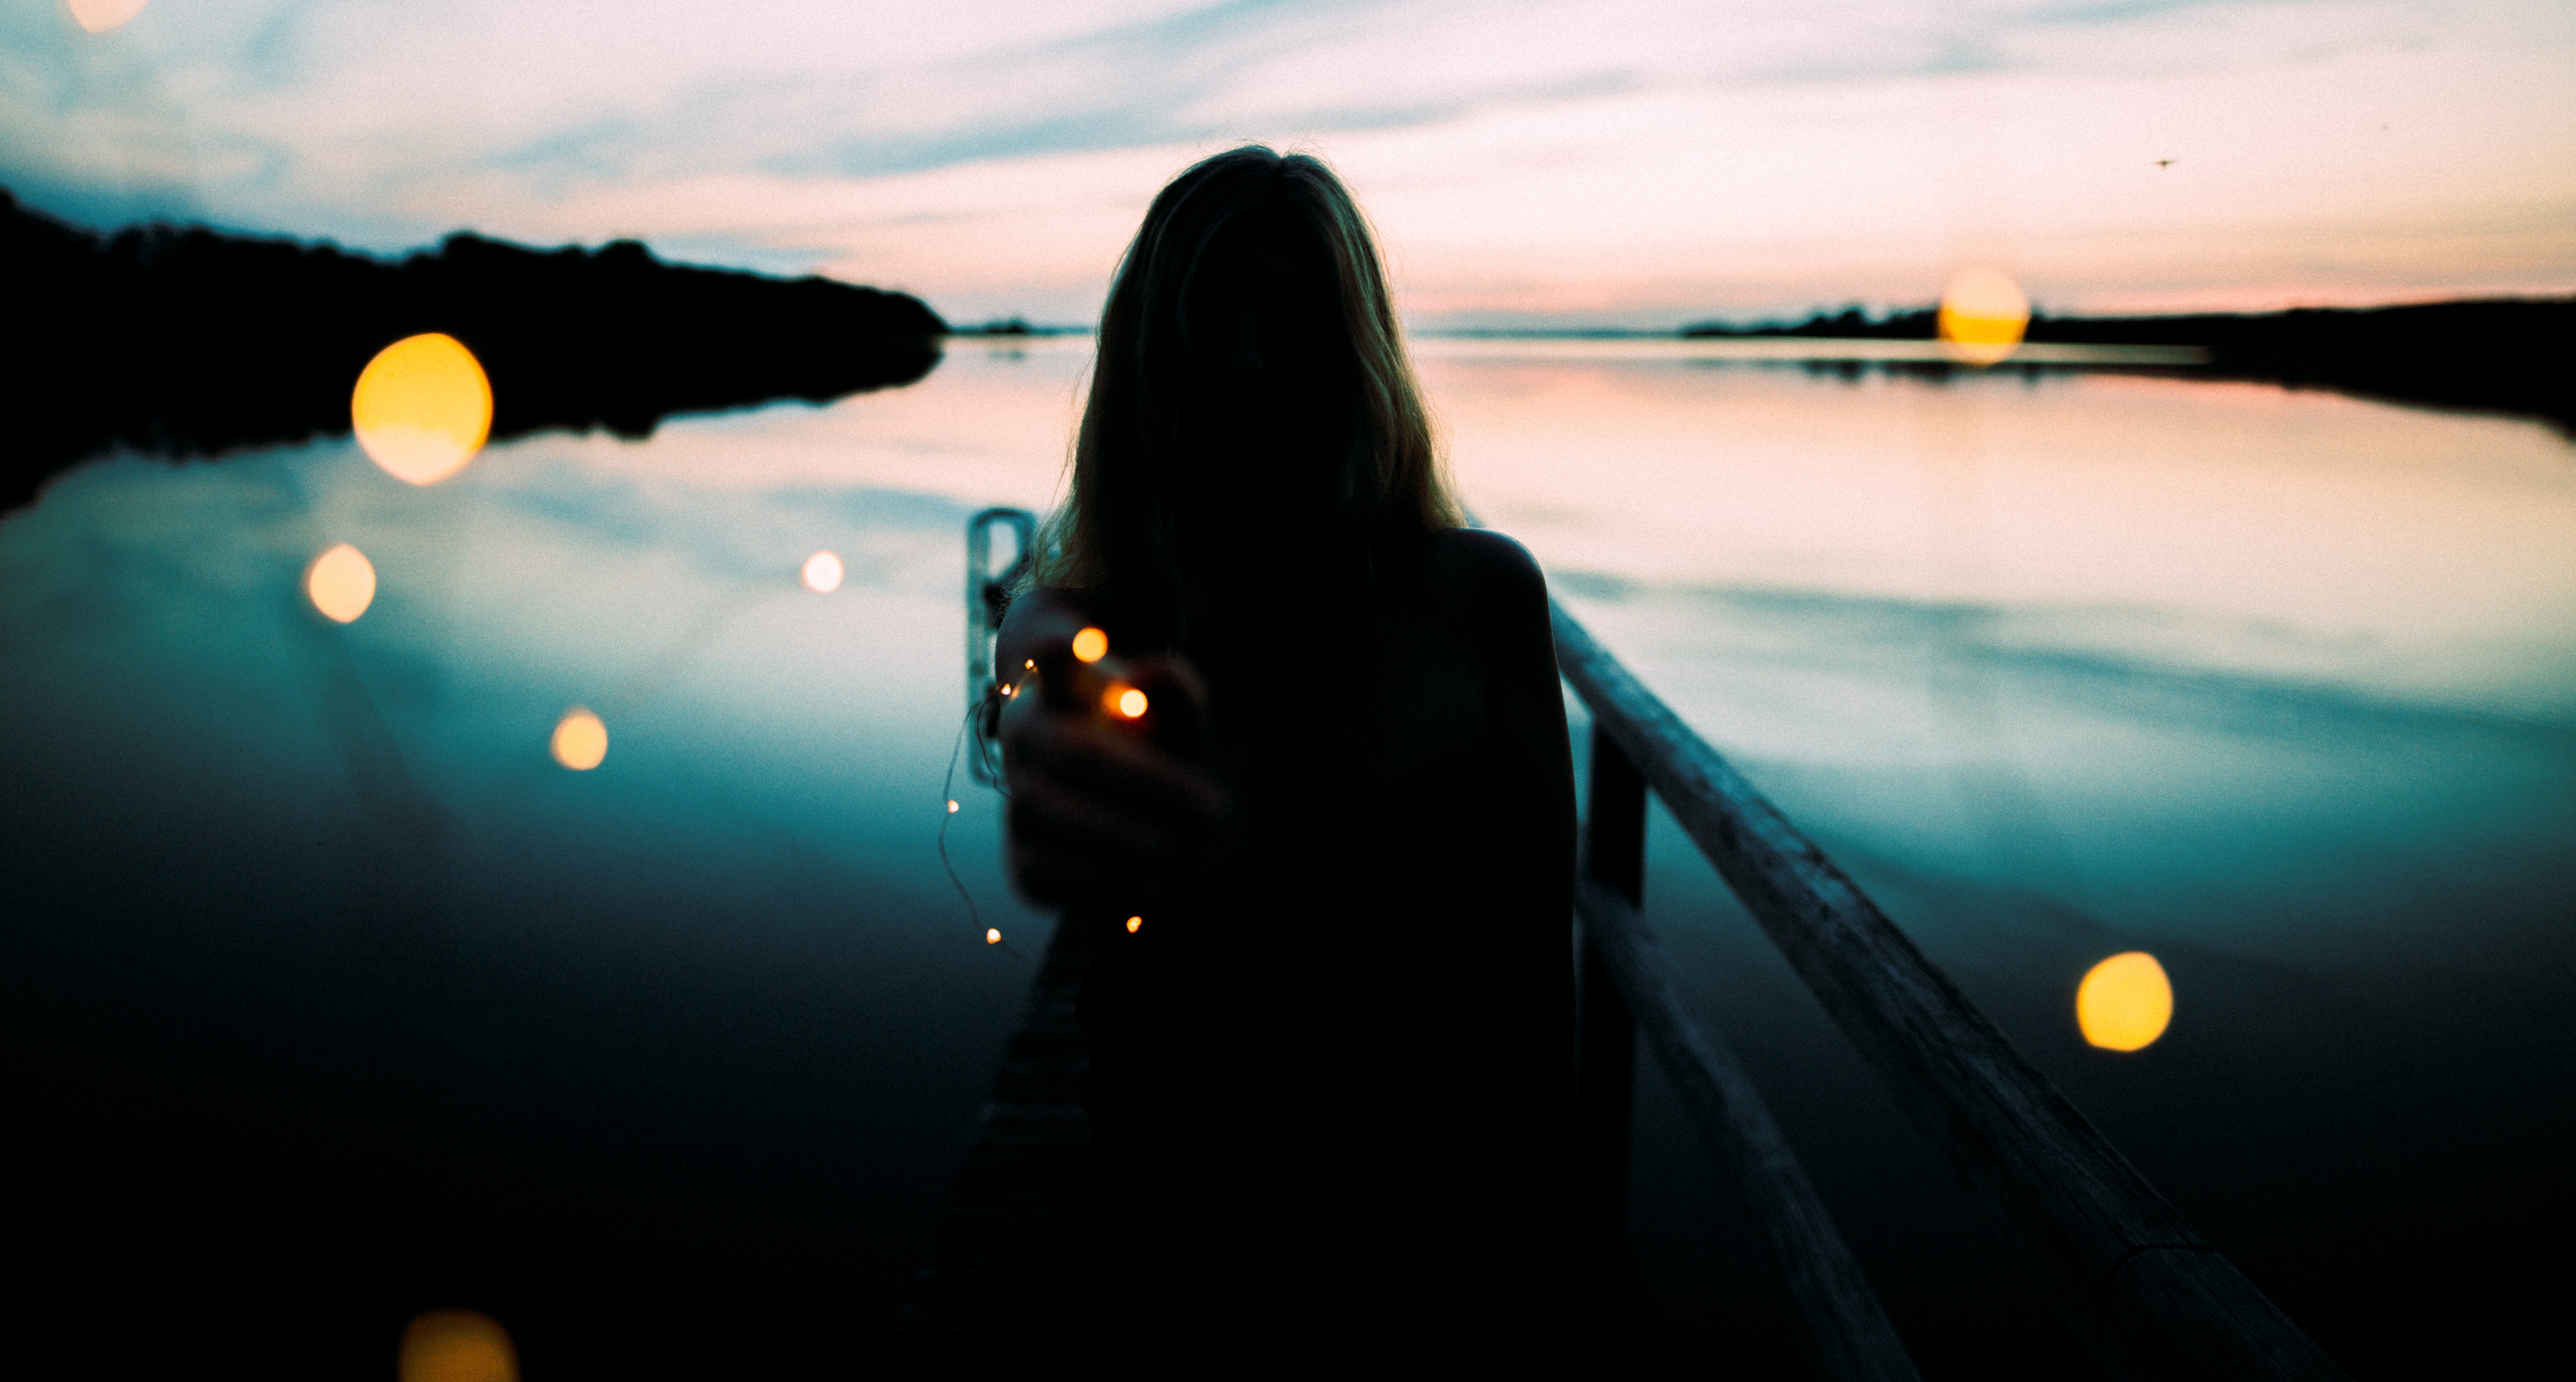 Silhouette of woman leaning on metal railings with background of body of water by the shoreline photo